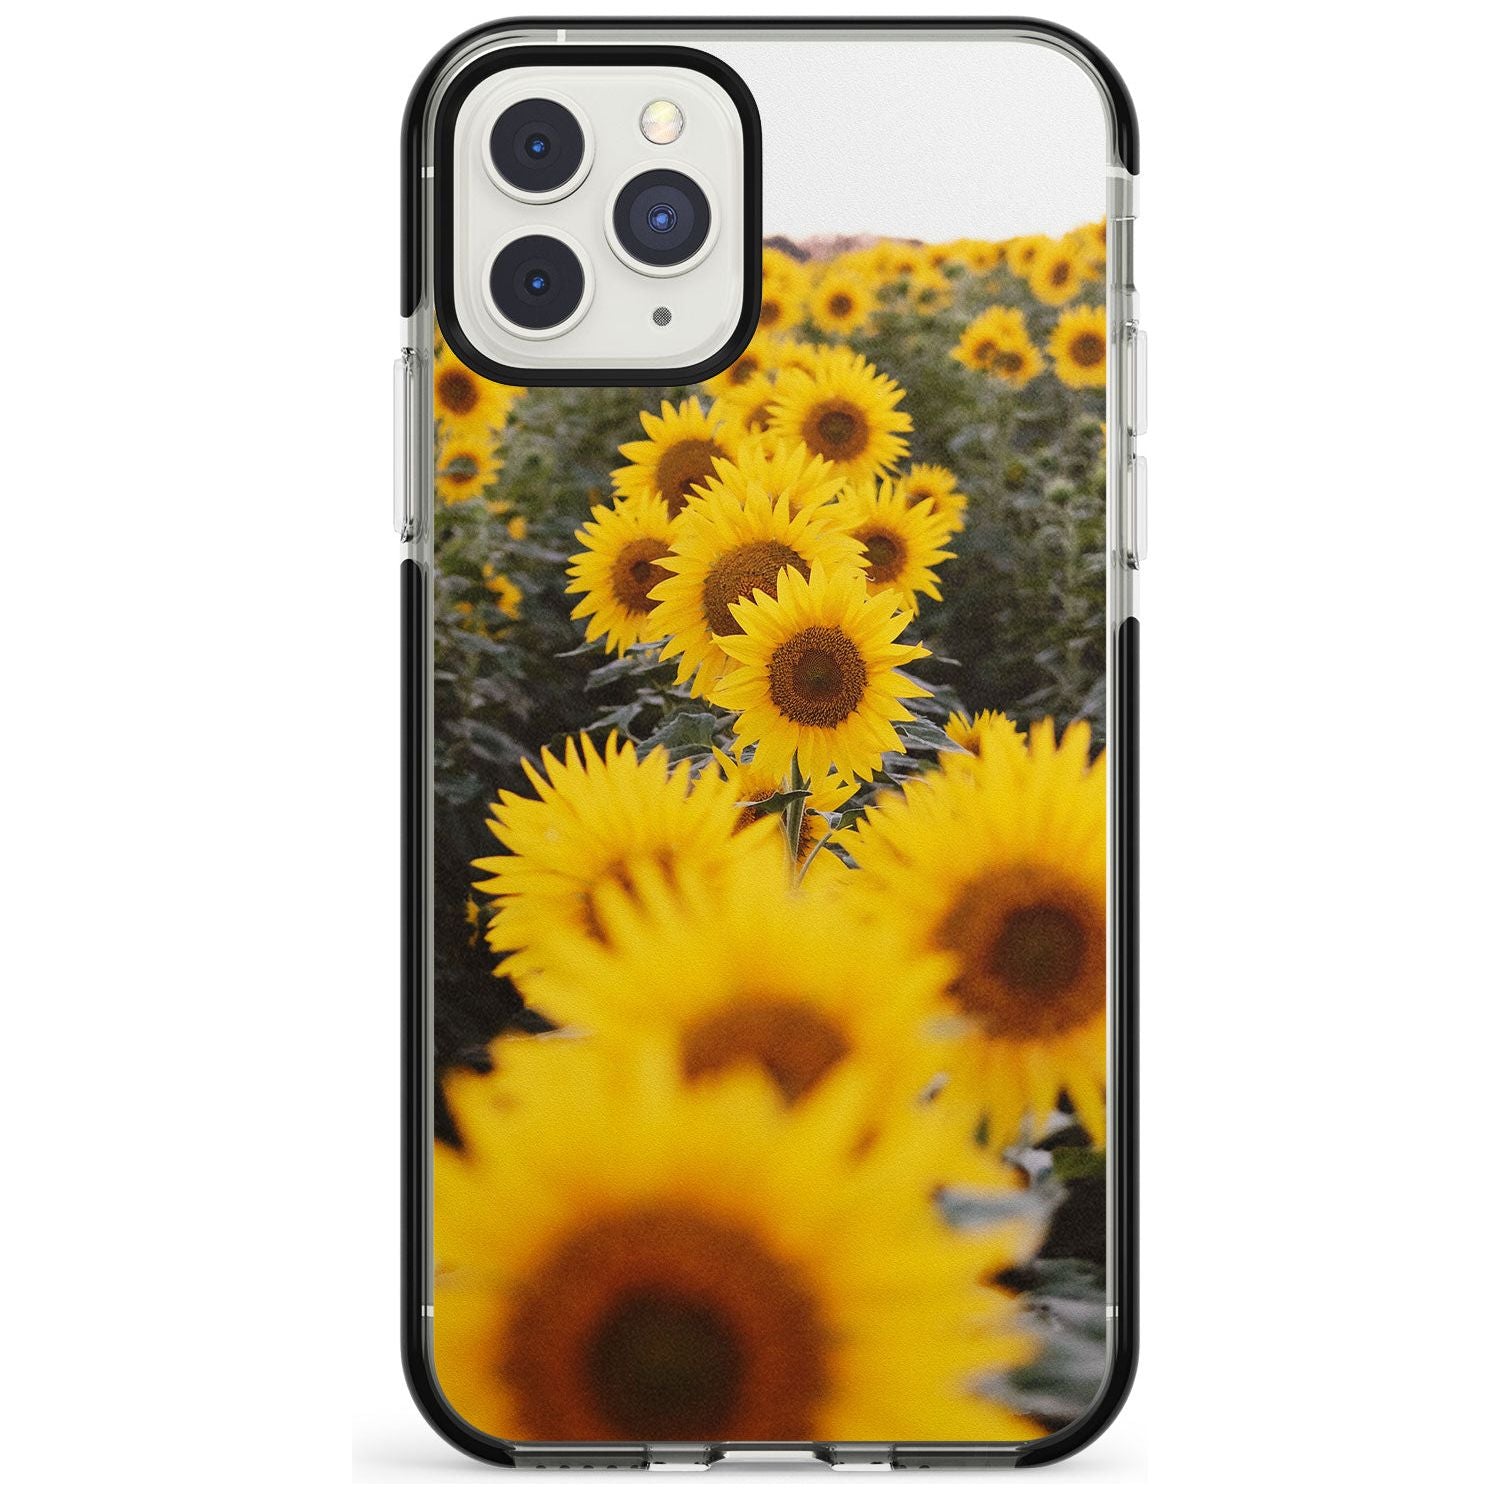 Sunflower Field Photograph Black Impact Phone Case for iPhone 11 Pro Max